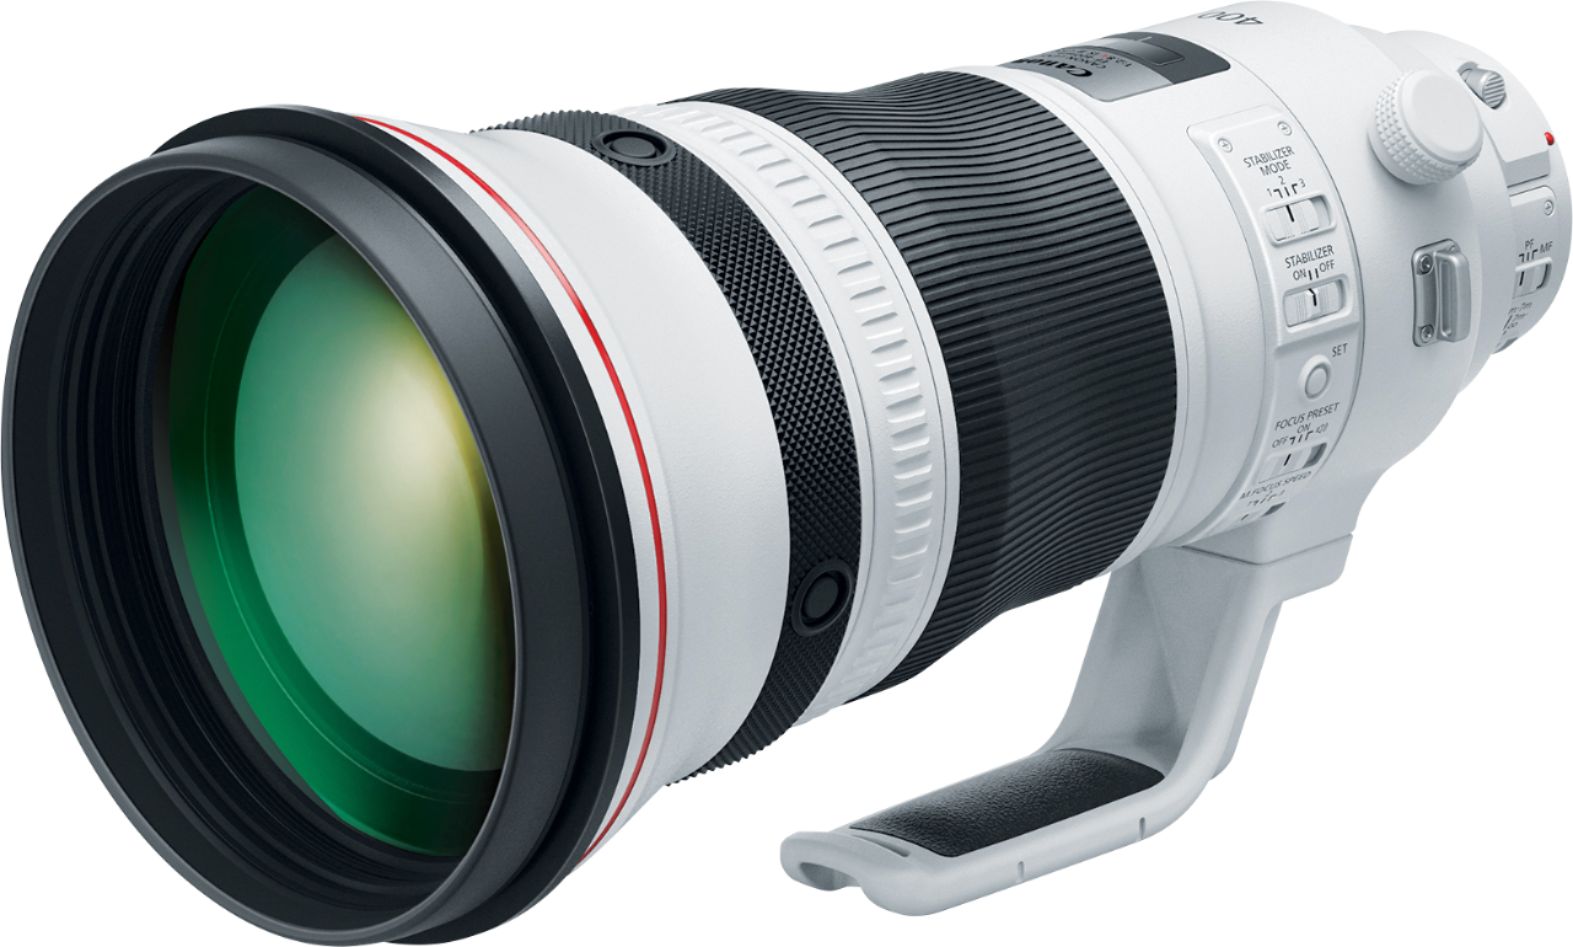 Left View: Canon - EF 800mm f/5.6L IS USM Super-Telephoto Lens for EOS Cameras - White